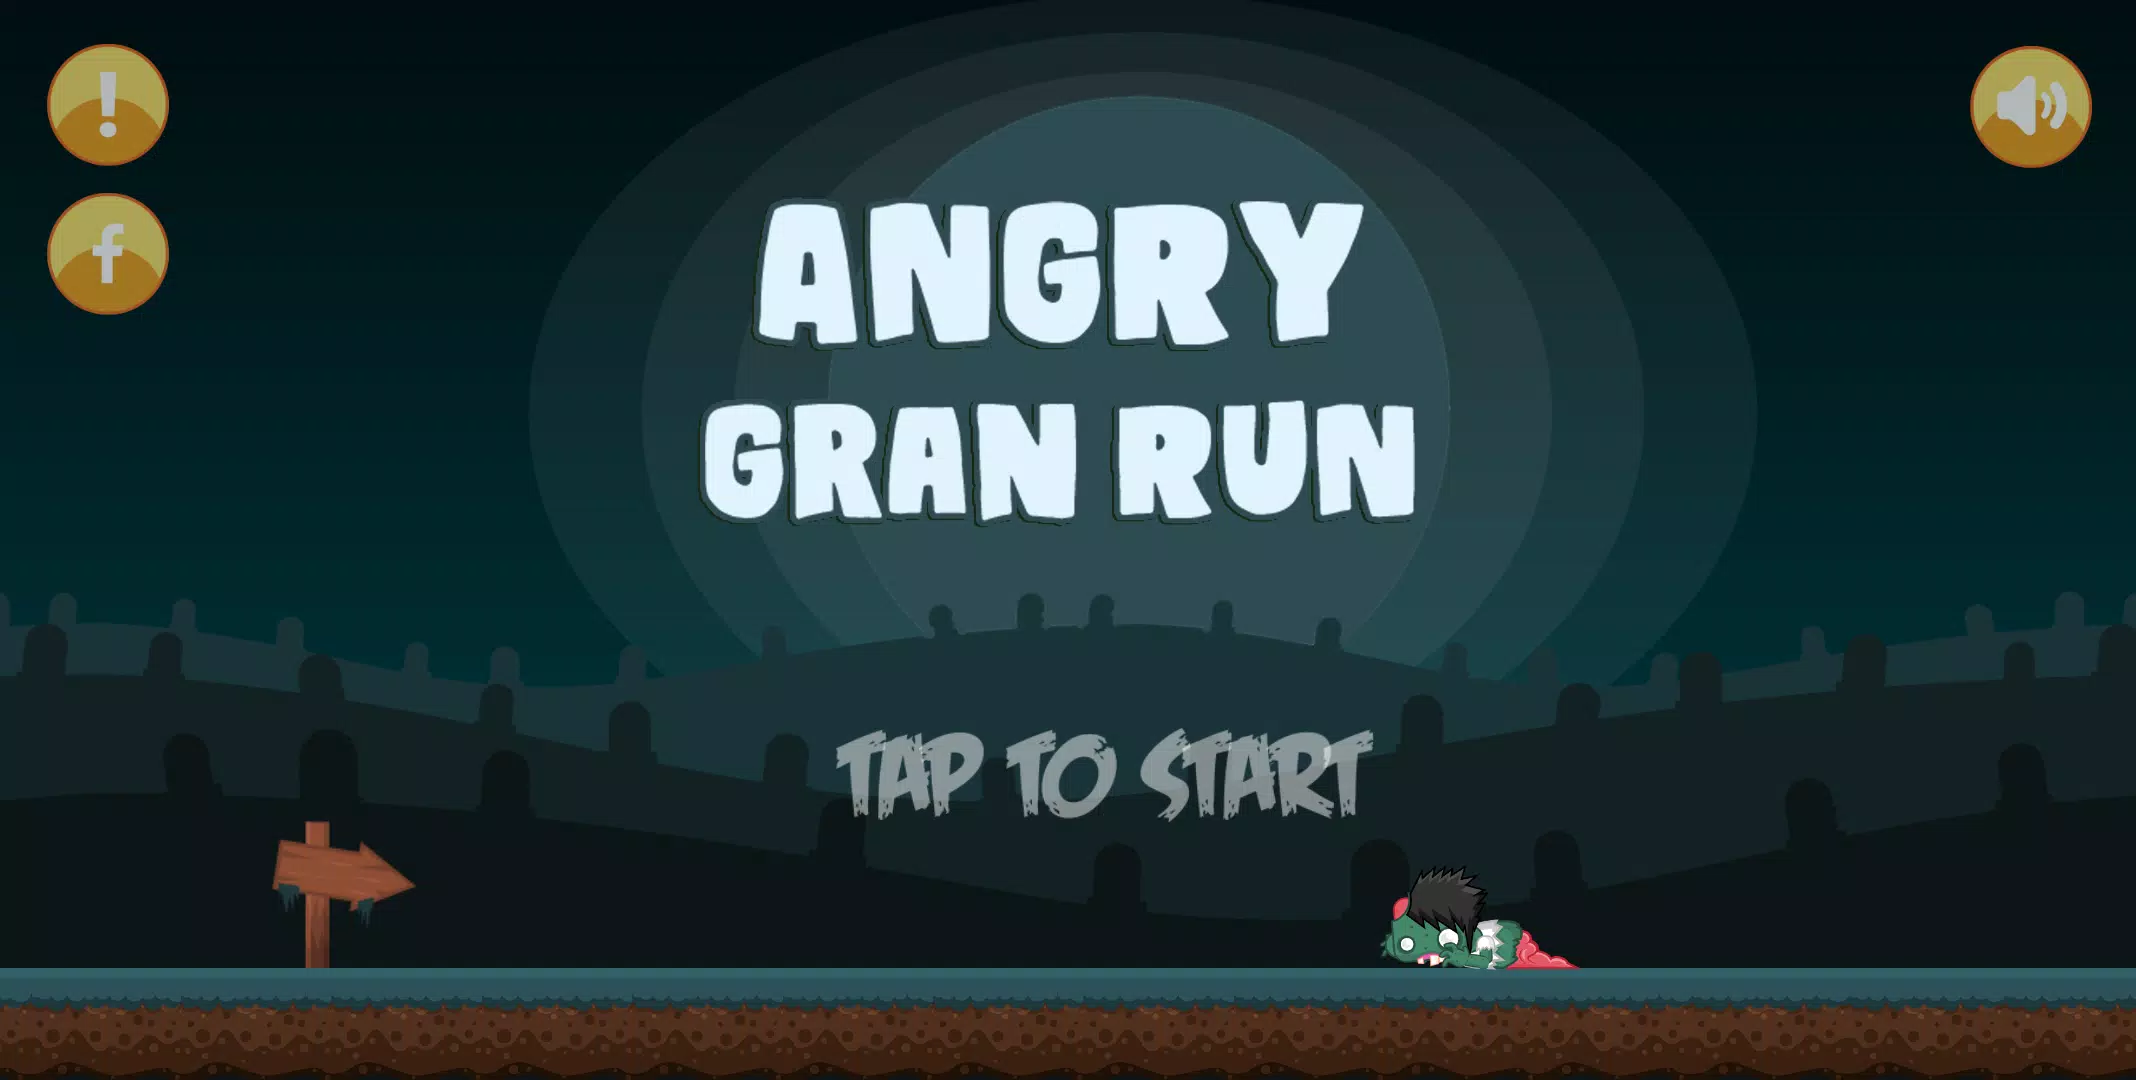 Angry Gran Run - Halloween Running Game APK pour Android Télécharger